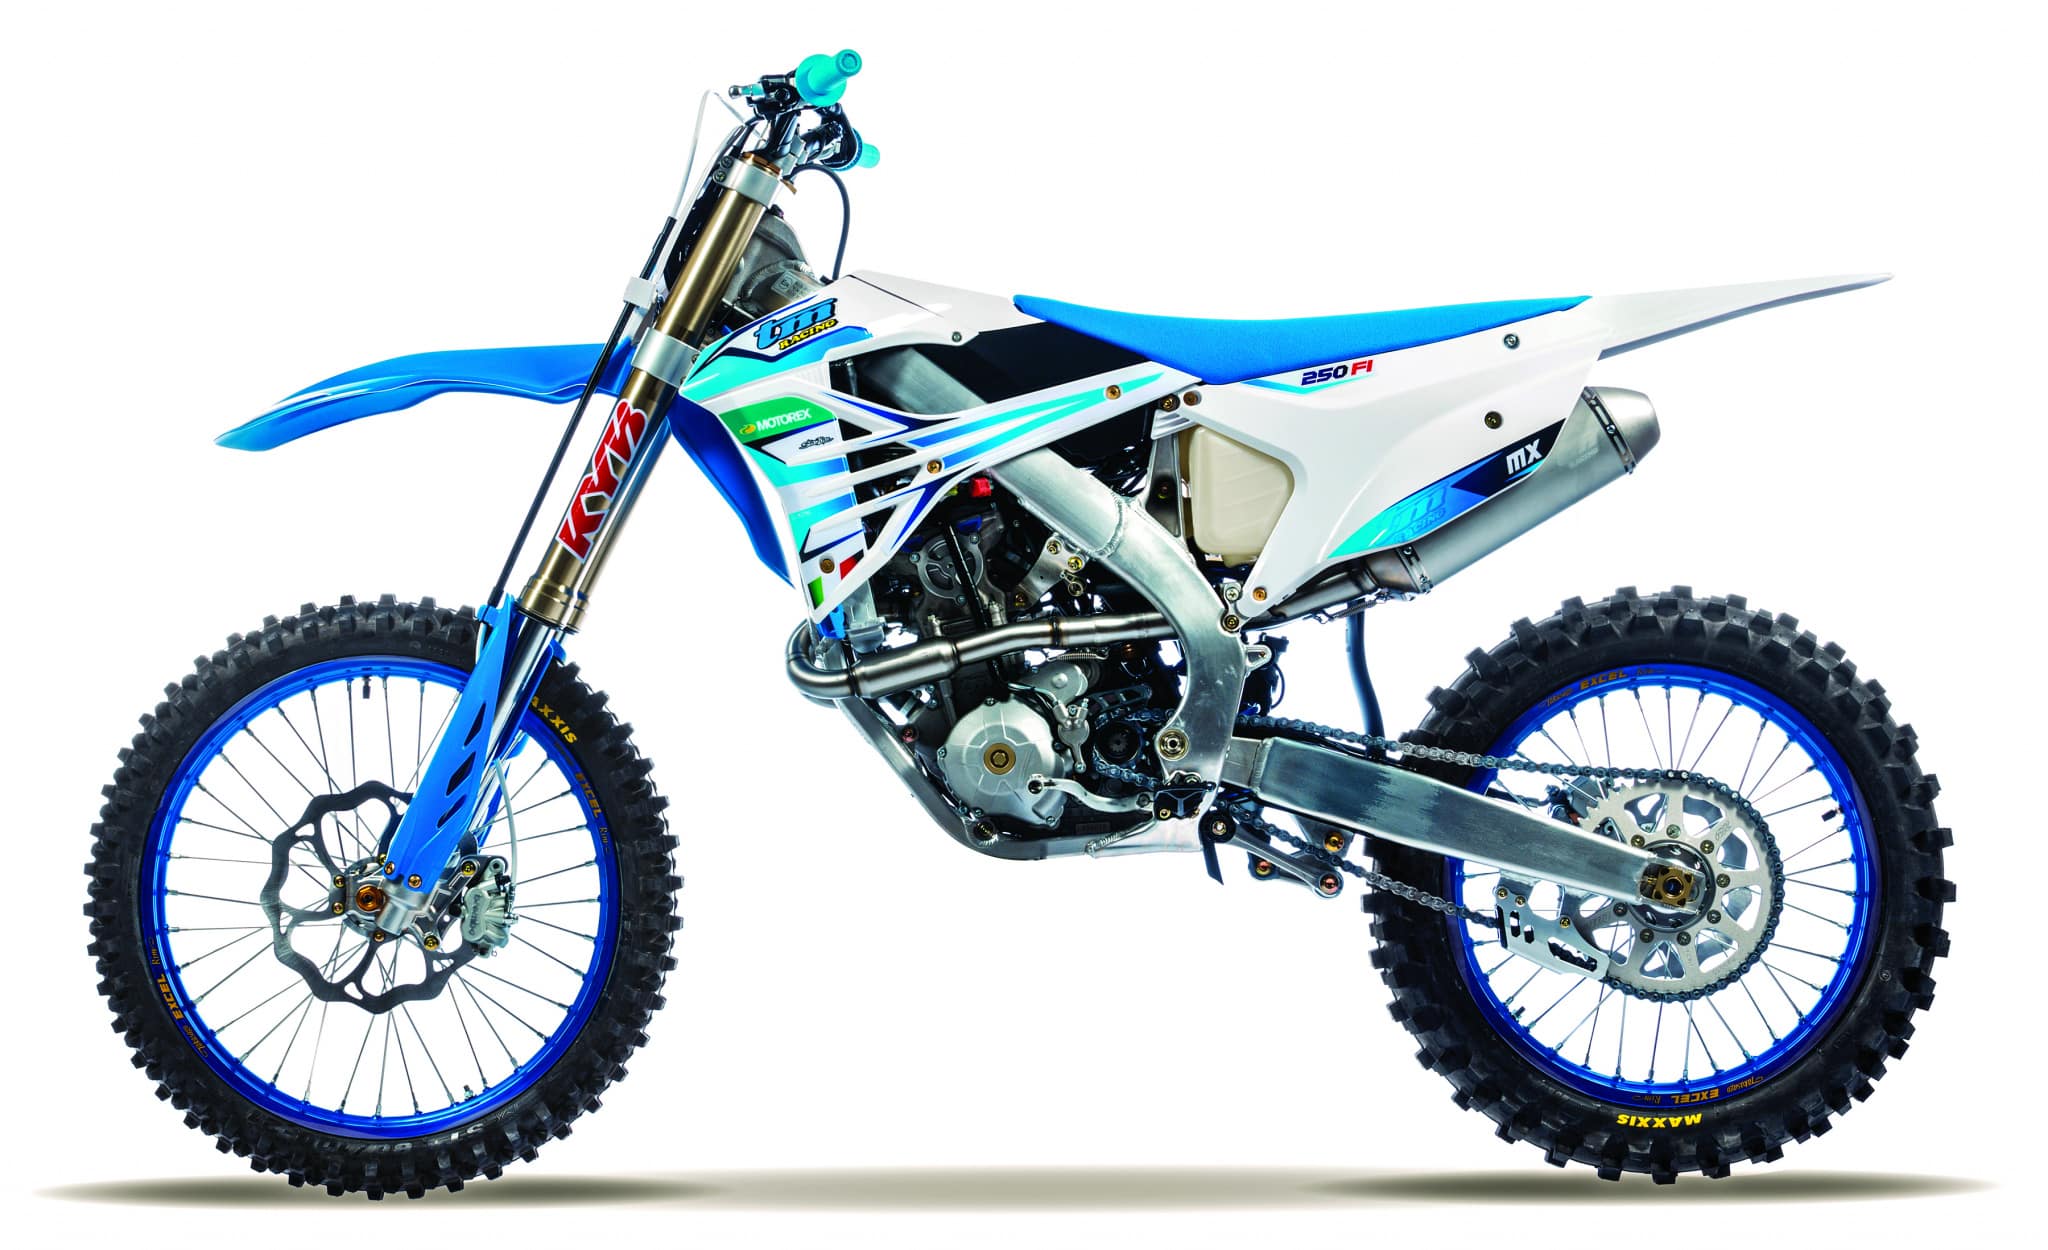 FIRST LOOK 2023 TM's FUELINJECTED MOTOCROSS BIKES — TWOSTROKES